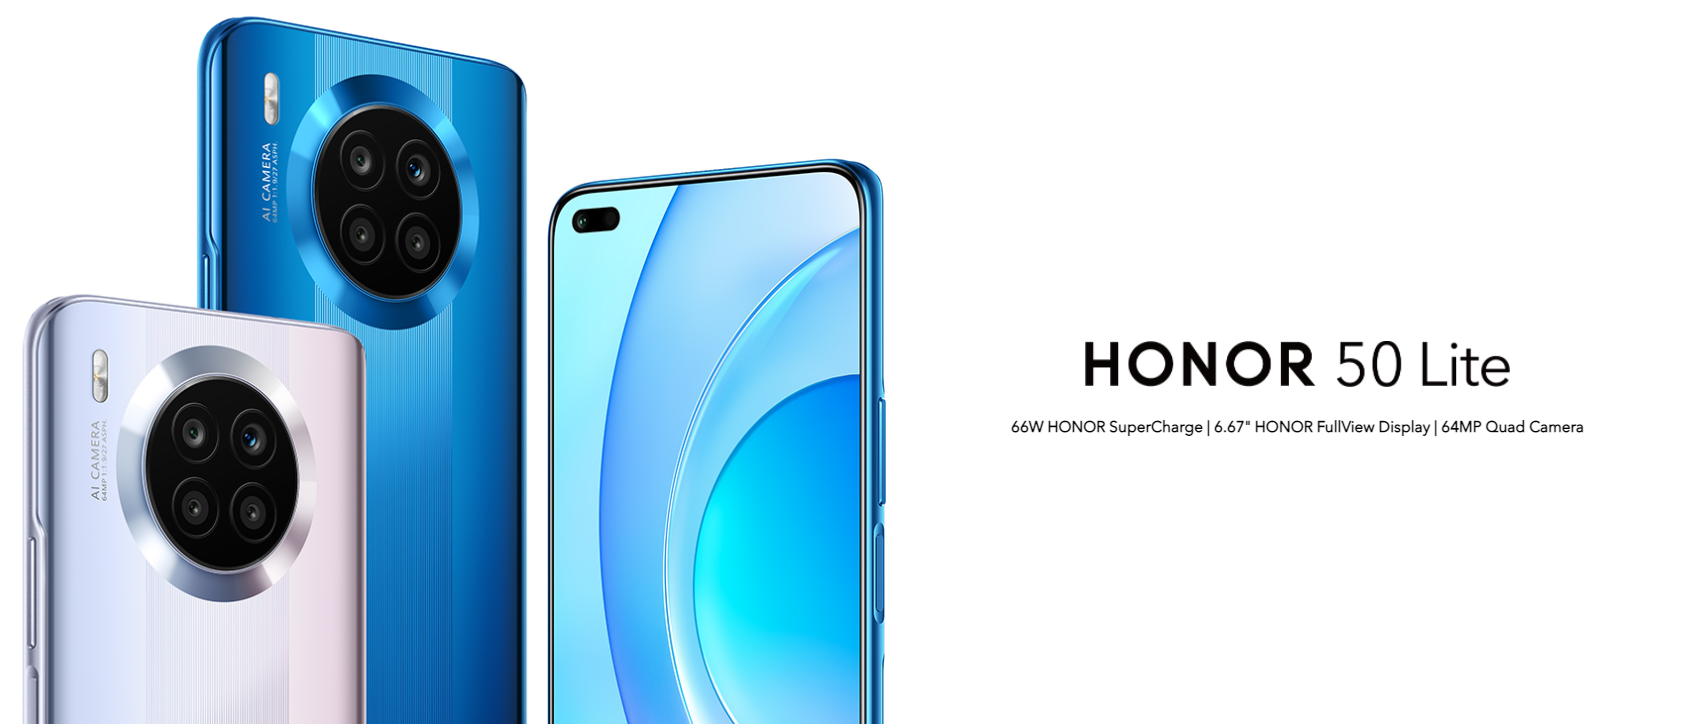 Honor 50 Lite - Google services, 66W charging and 64MP camera for €299